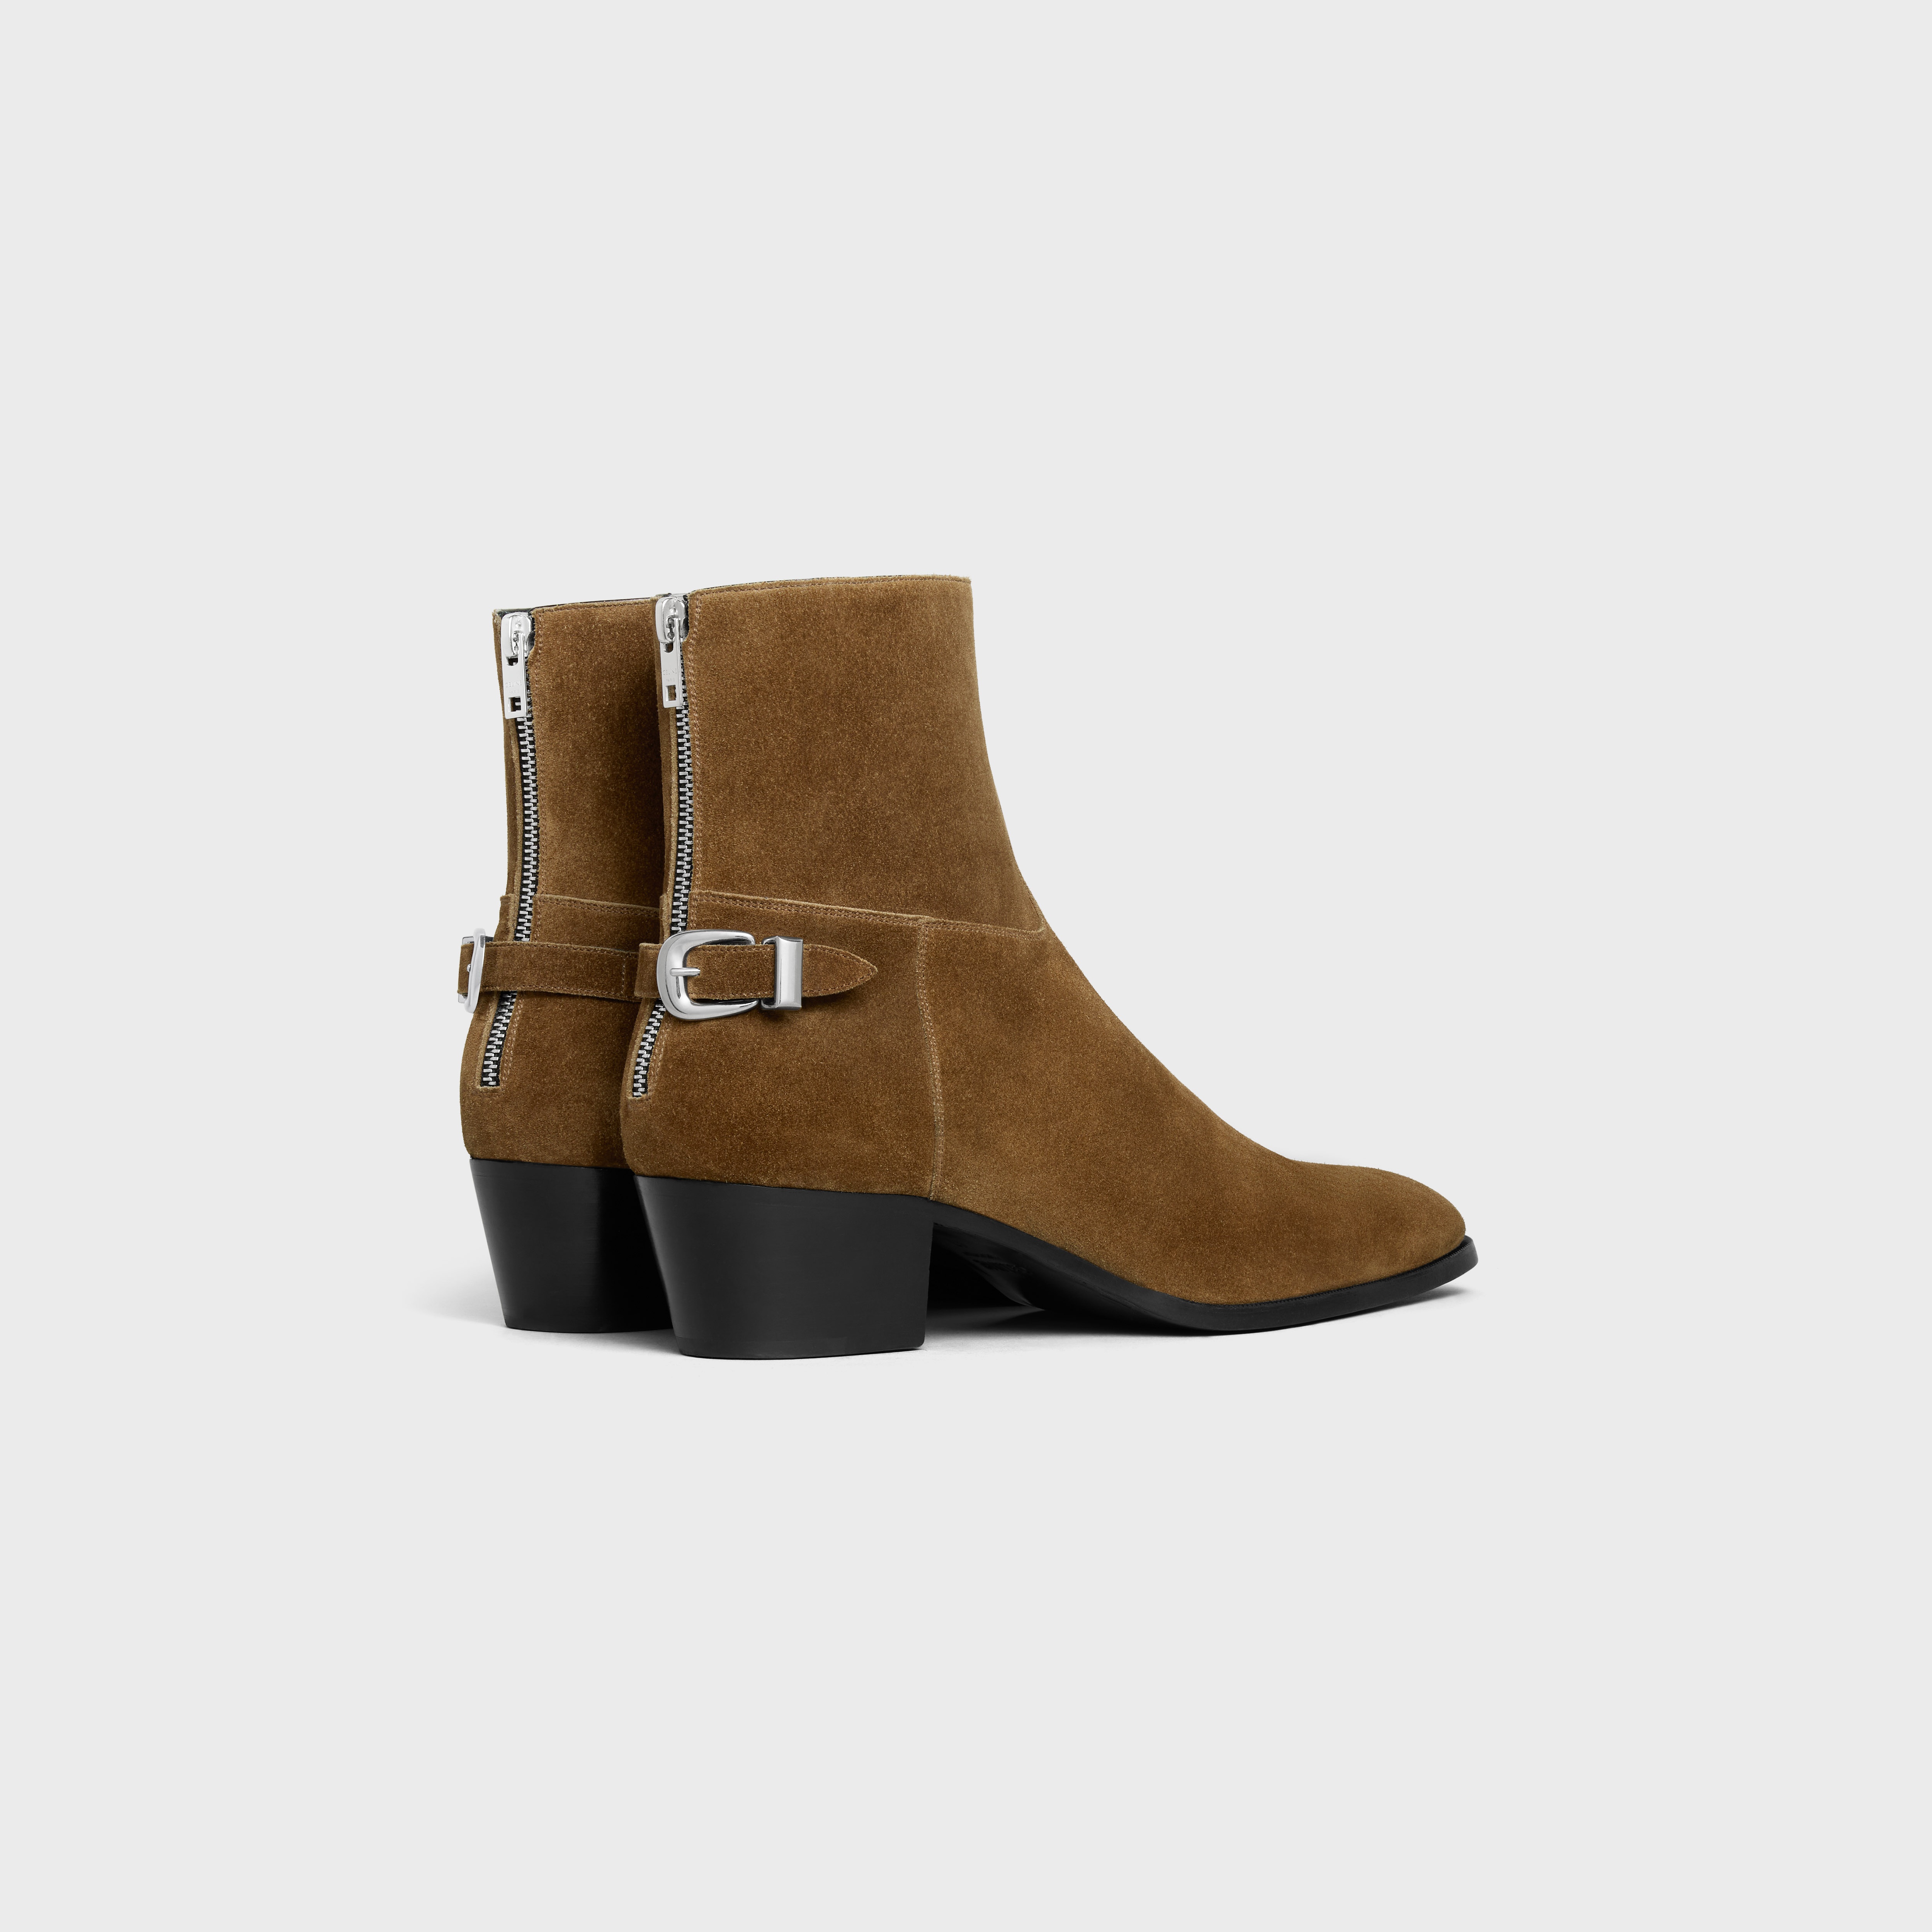 BACK BUCKLE ZIPPED ISAAC BOOT in Suede Calfskin - 3